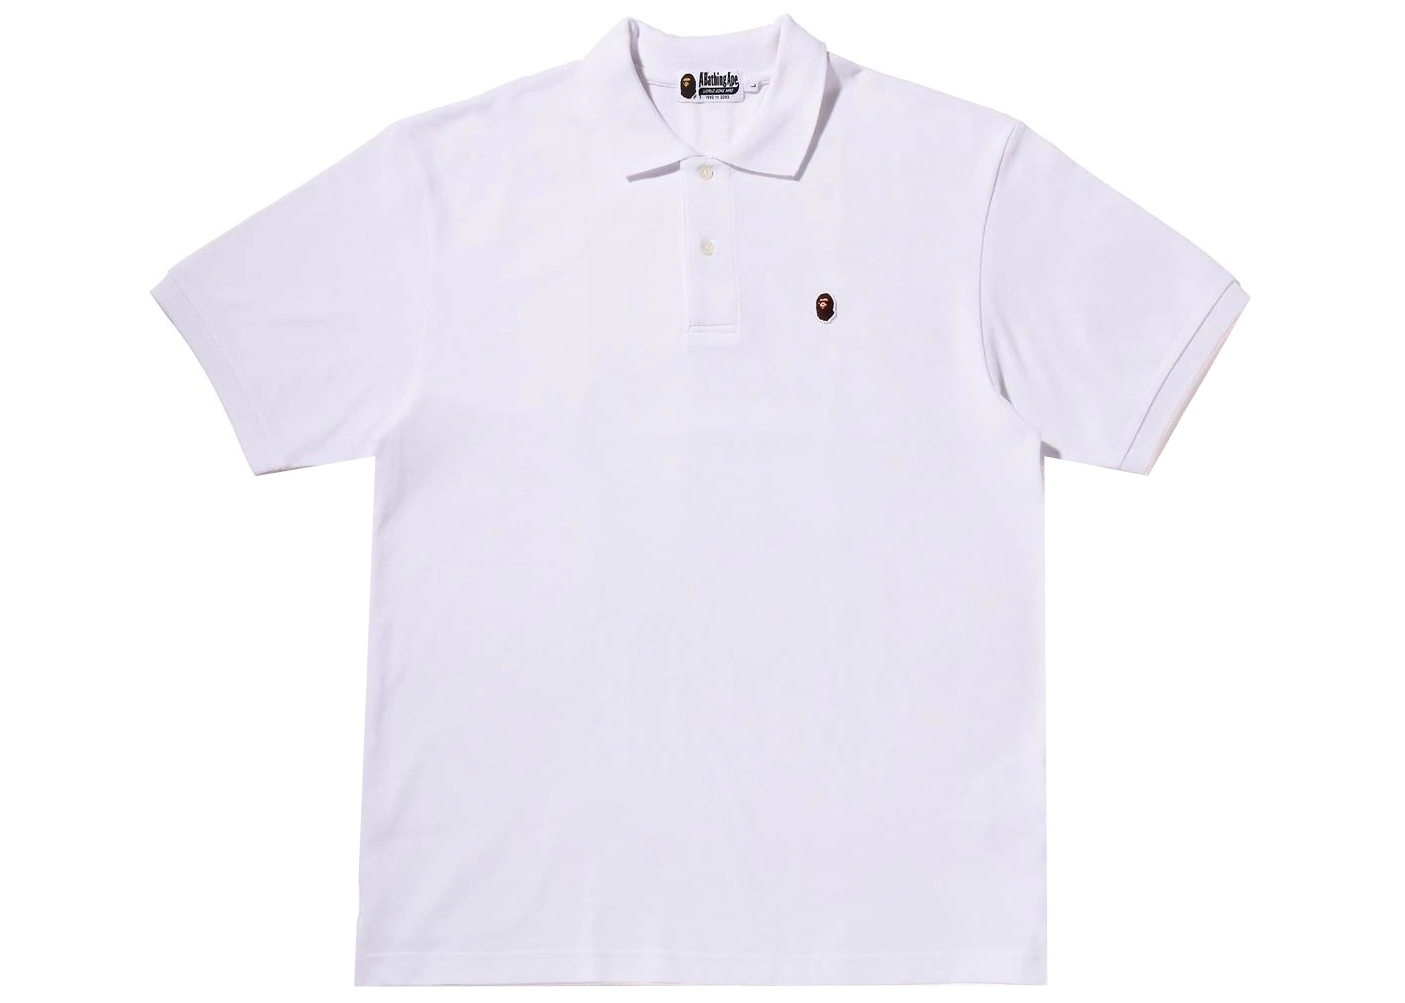 BAPE Ape Head One Point Relaxed Fit Polo White